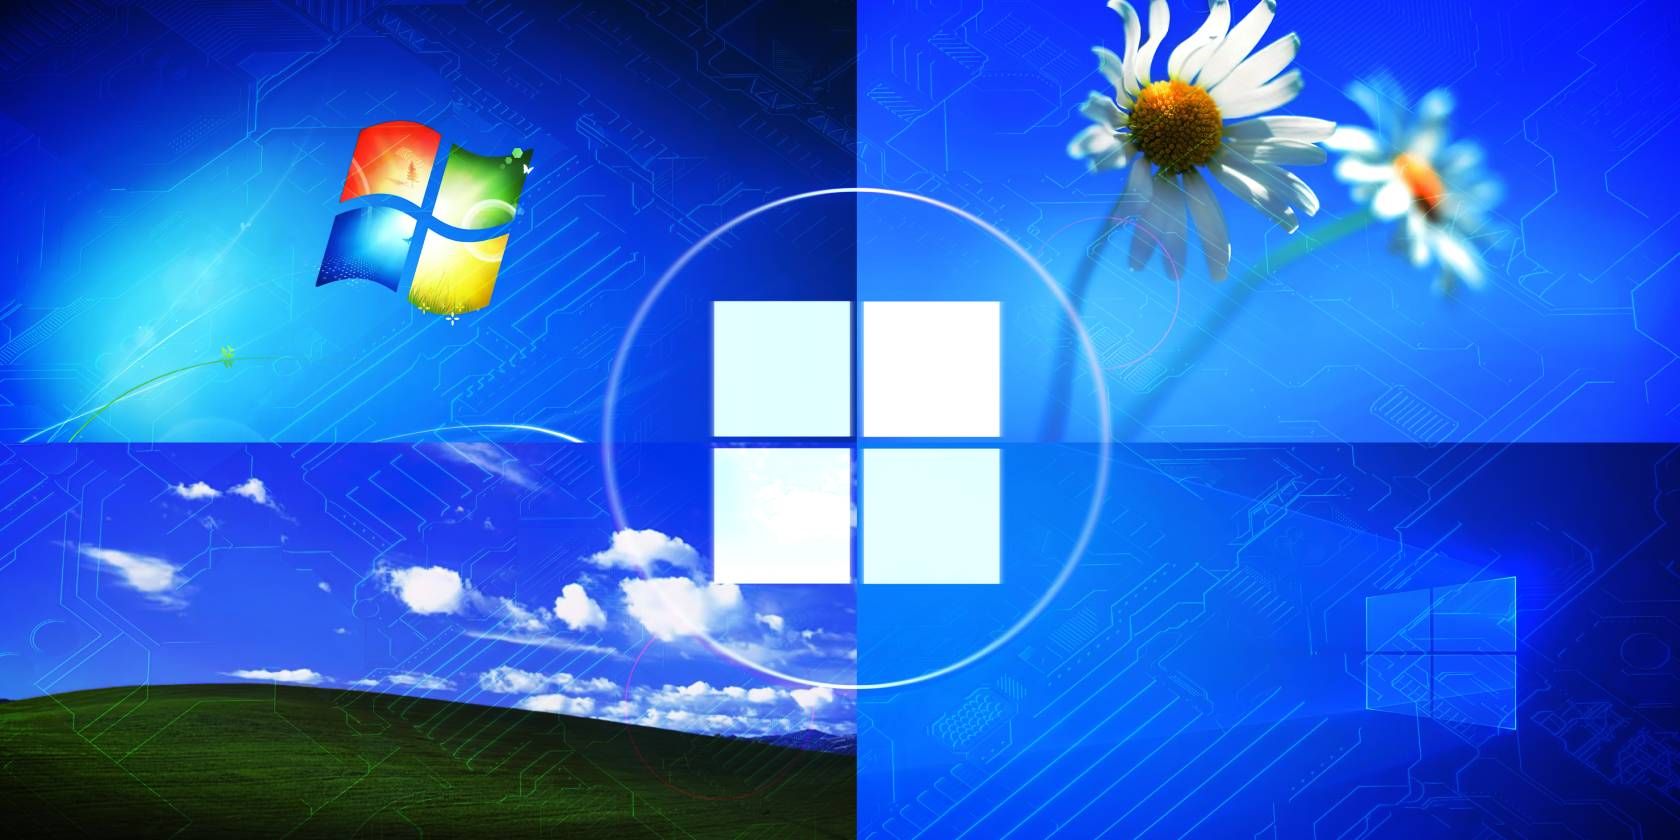 Evolution of Windows operating system wallpapers from Windows XP to Windows 10, featuring iconic backgrounds and the Windows logo.